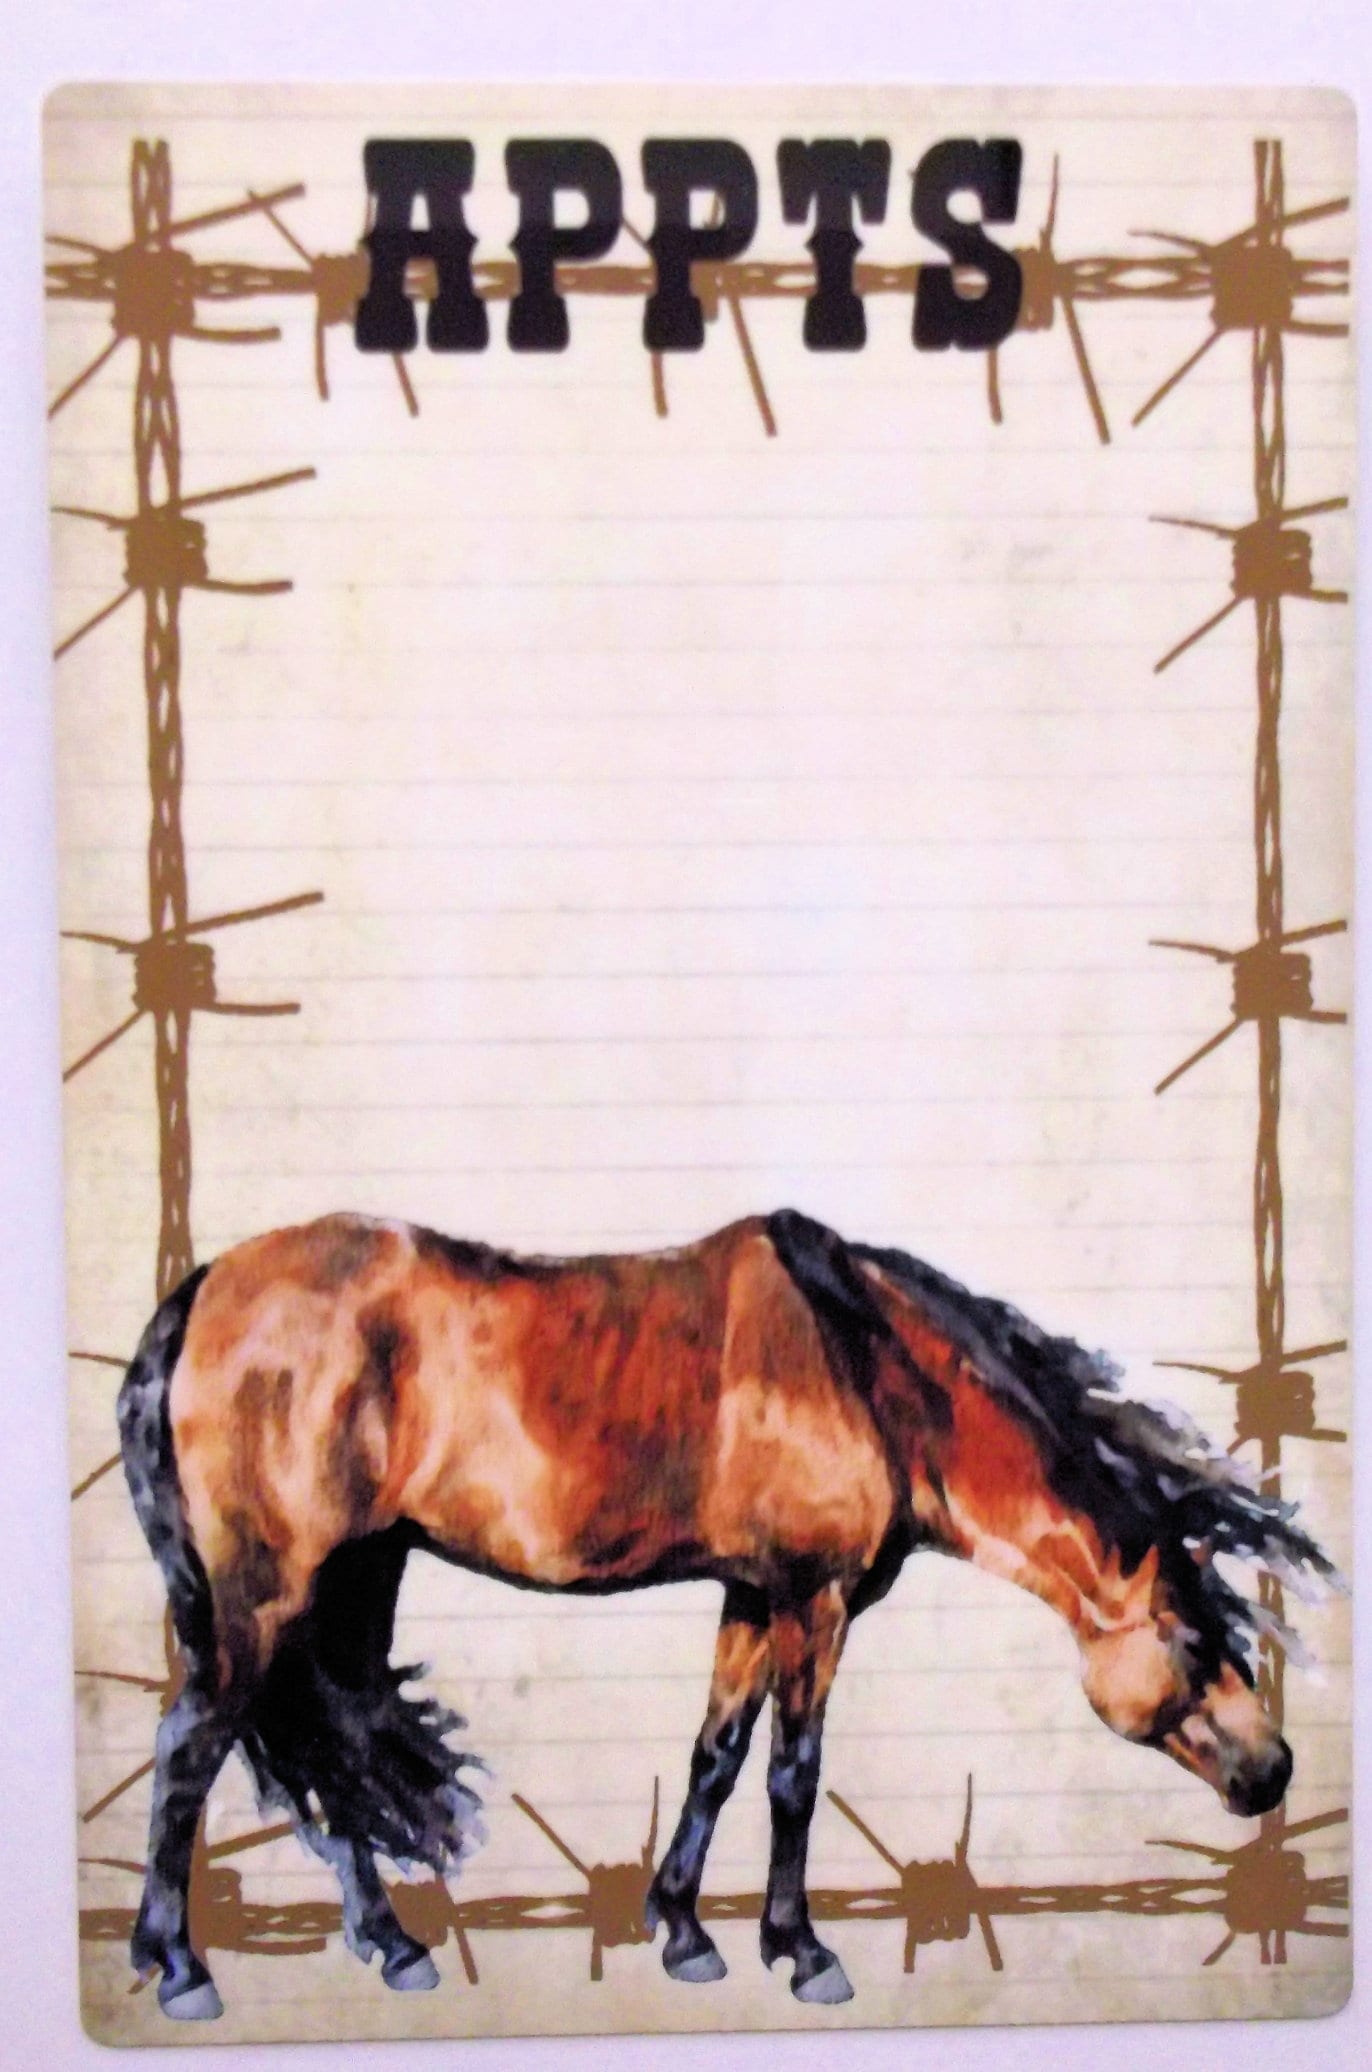 Dry Erase Board with Horse, Bay Horse, Illustration, Stocking Stuffer, Gift under 20, Horse Lover, Rustic, Barbed Wire